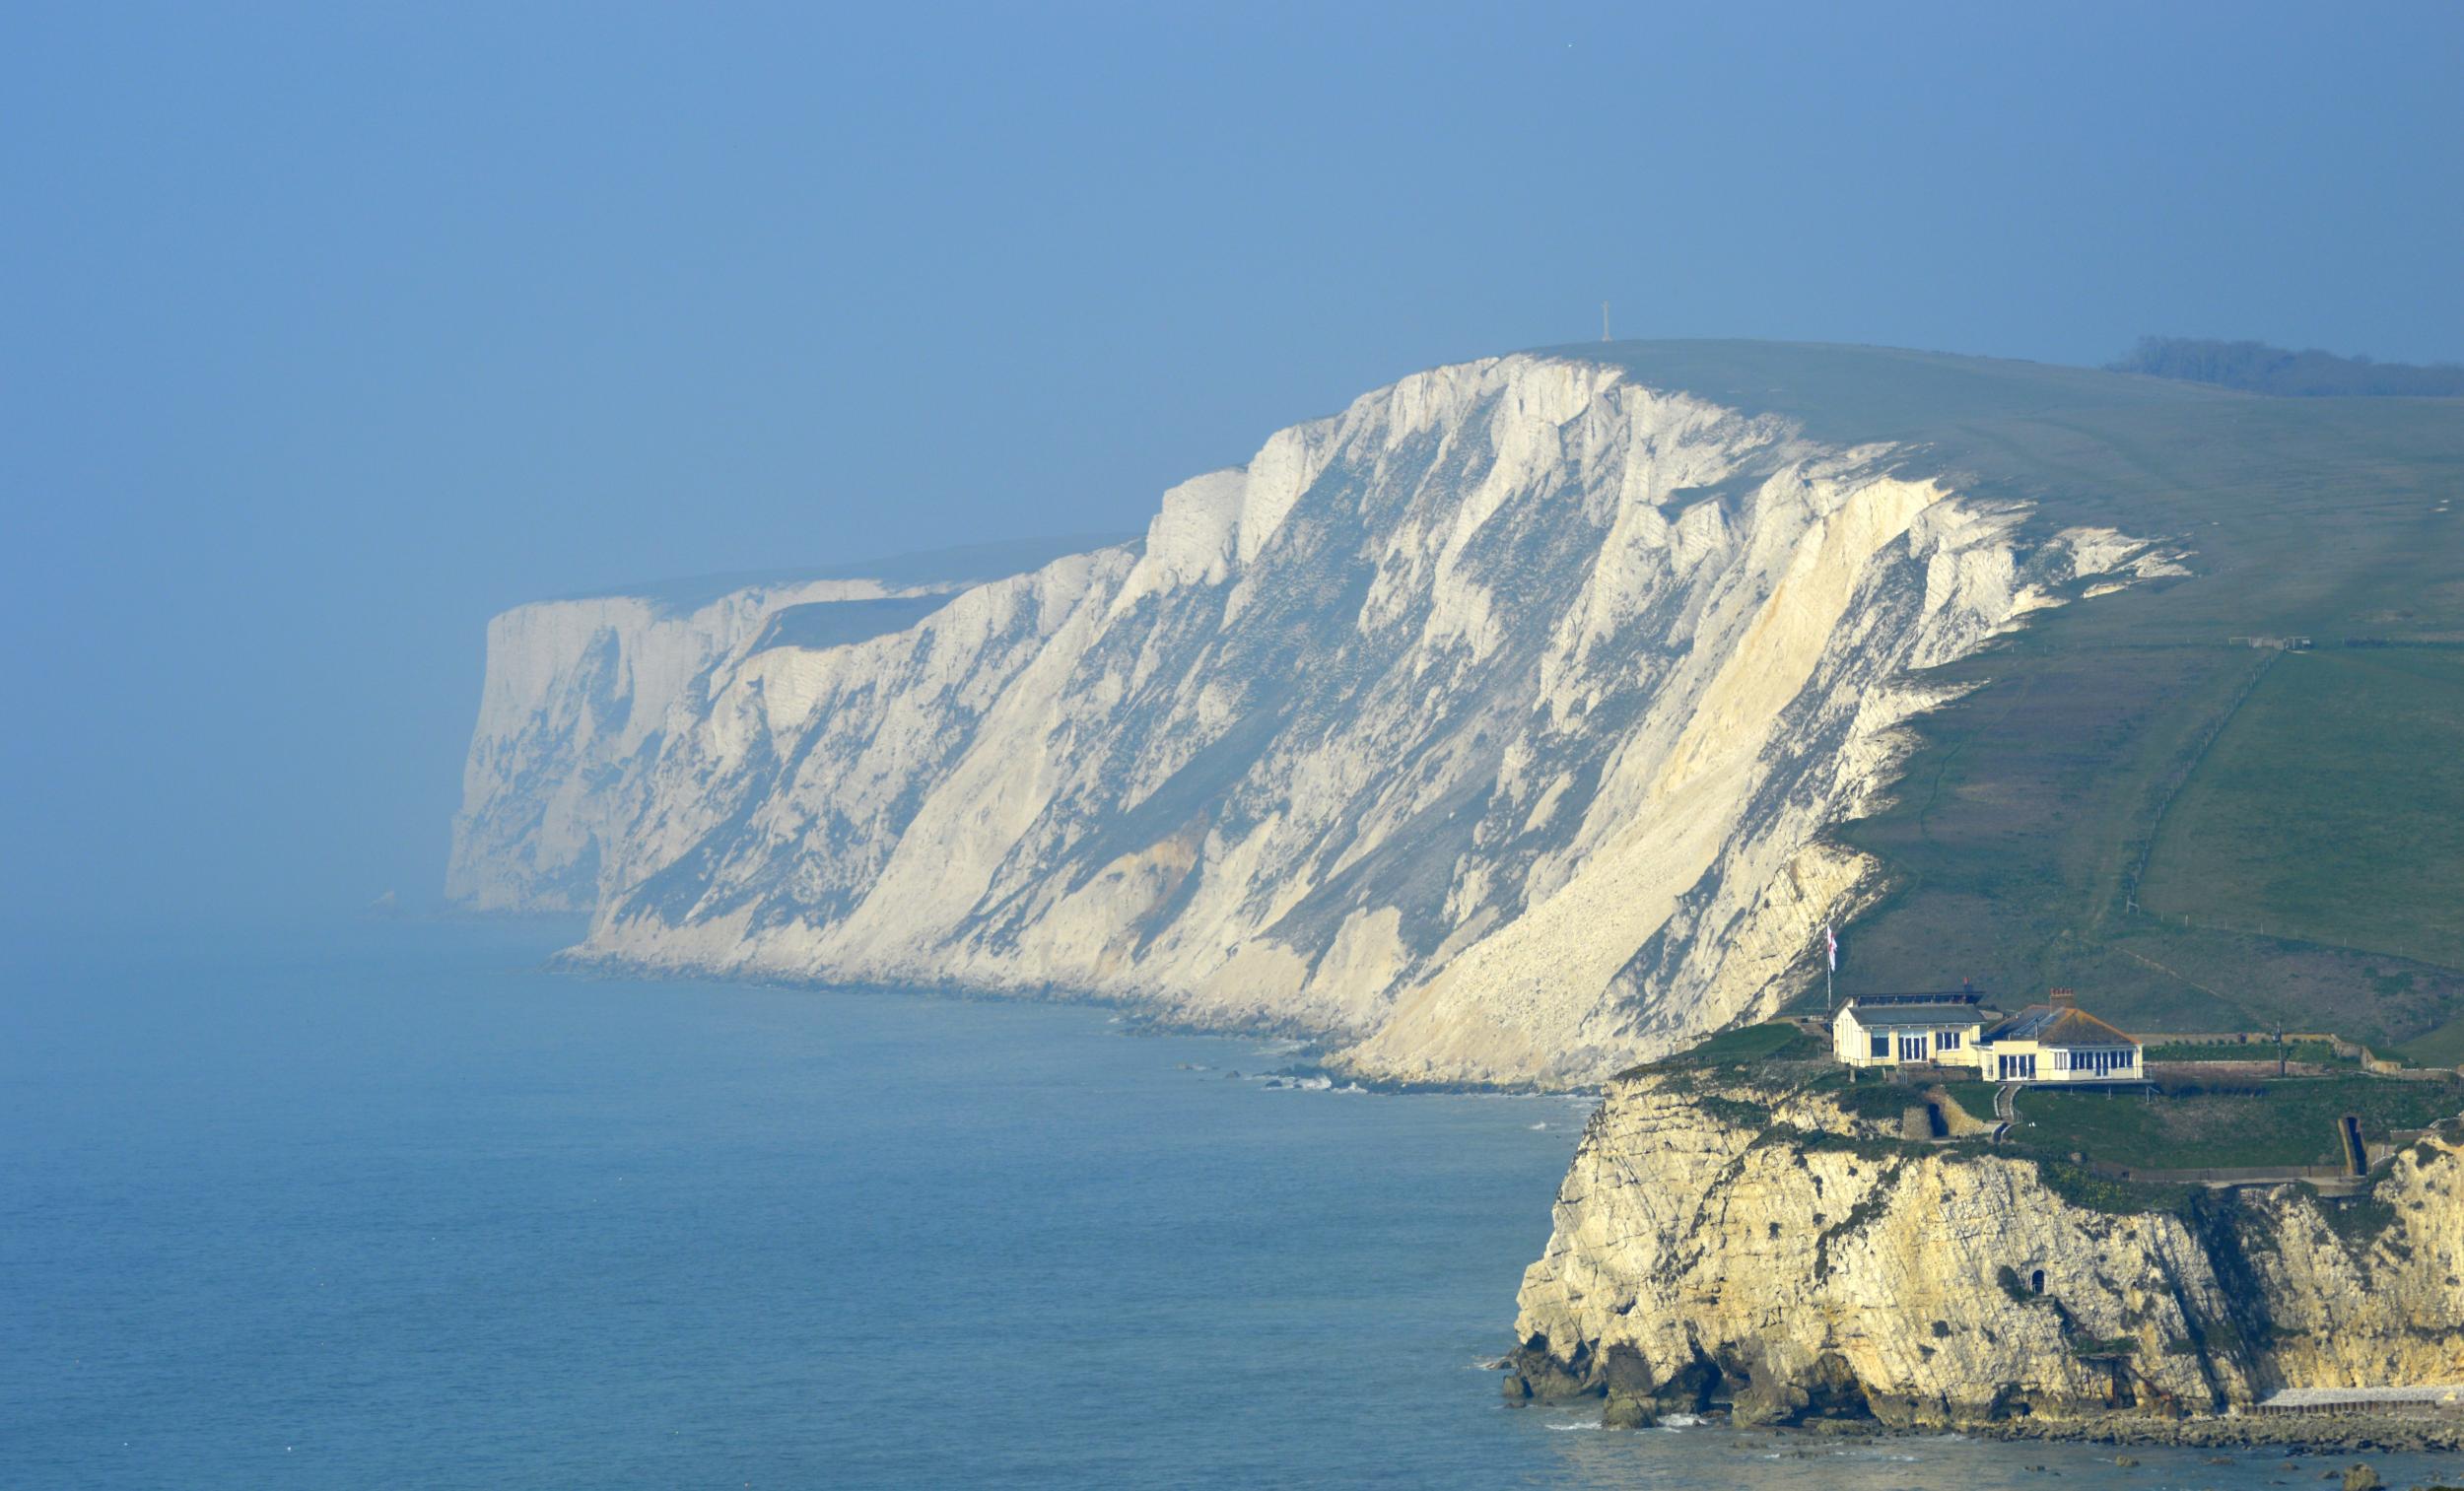 The Isle of Wight is closer to home